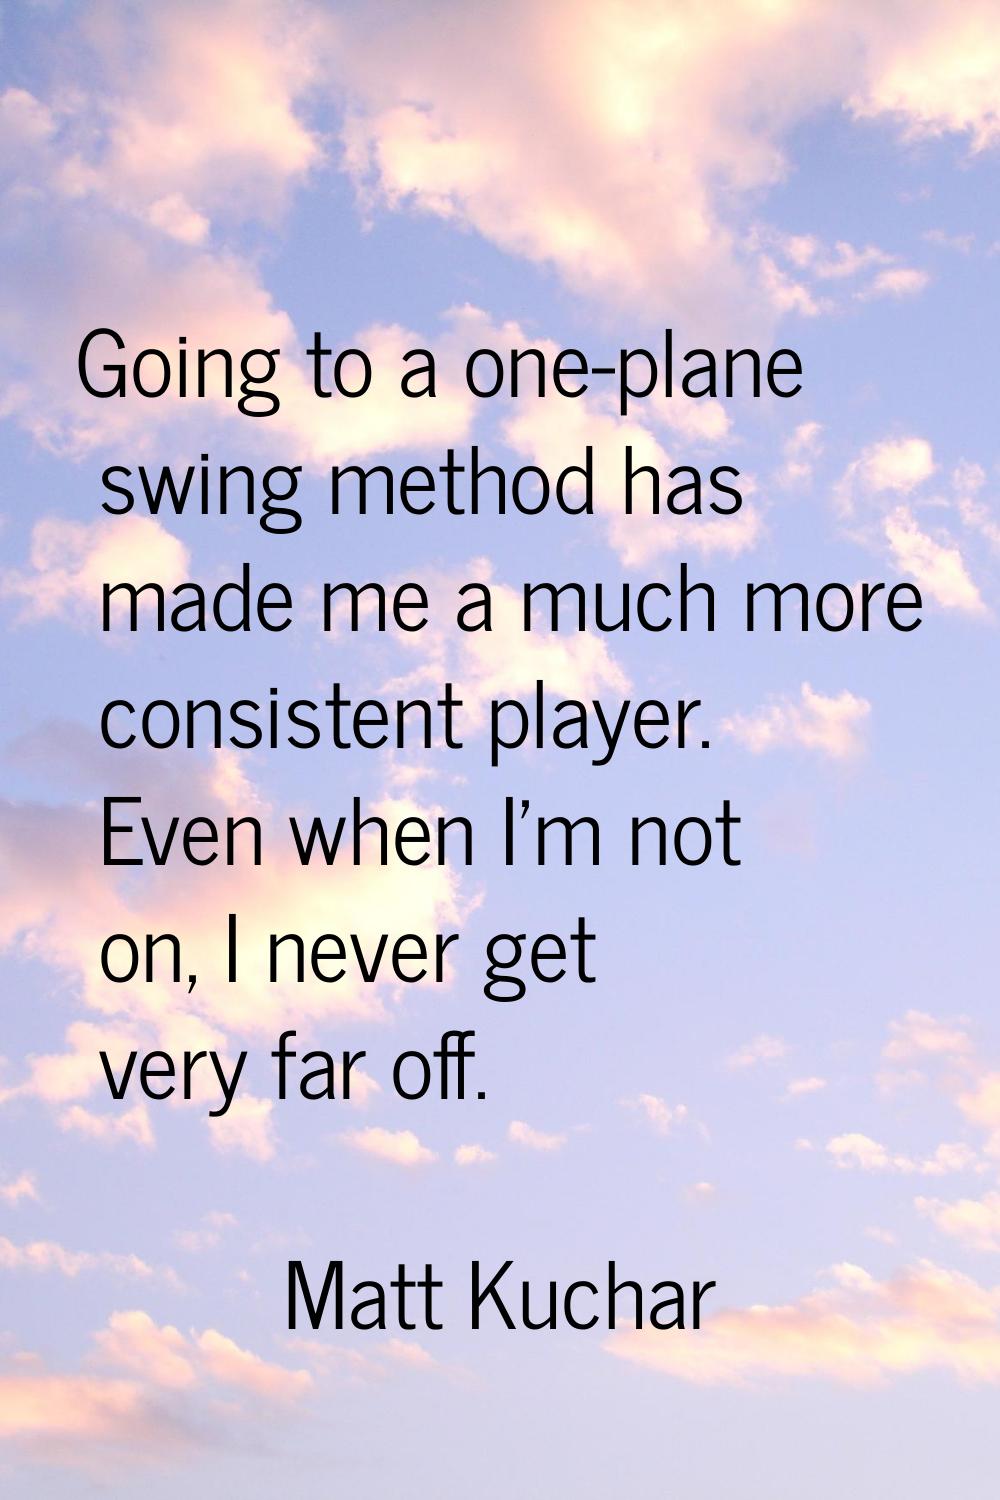 Going to a one-plane swing method has made me a much more consistent player. Even when I'm not on, 